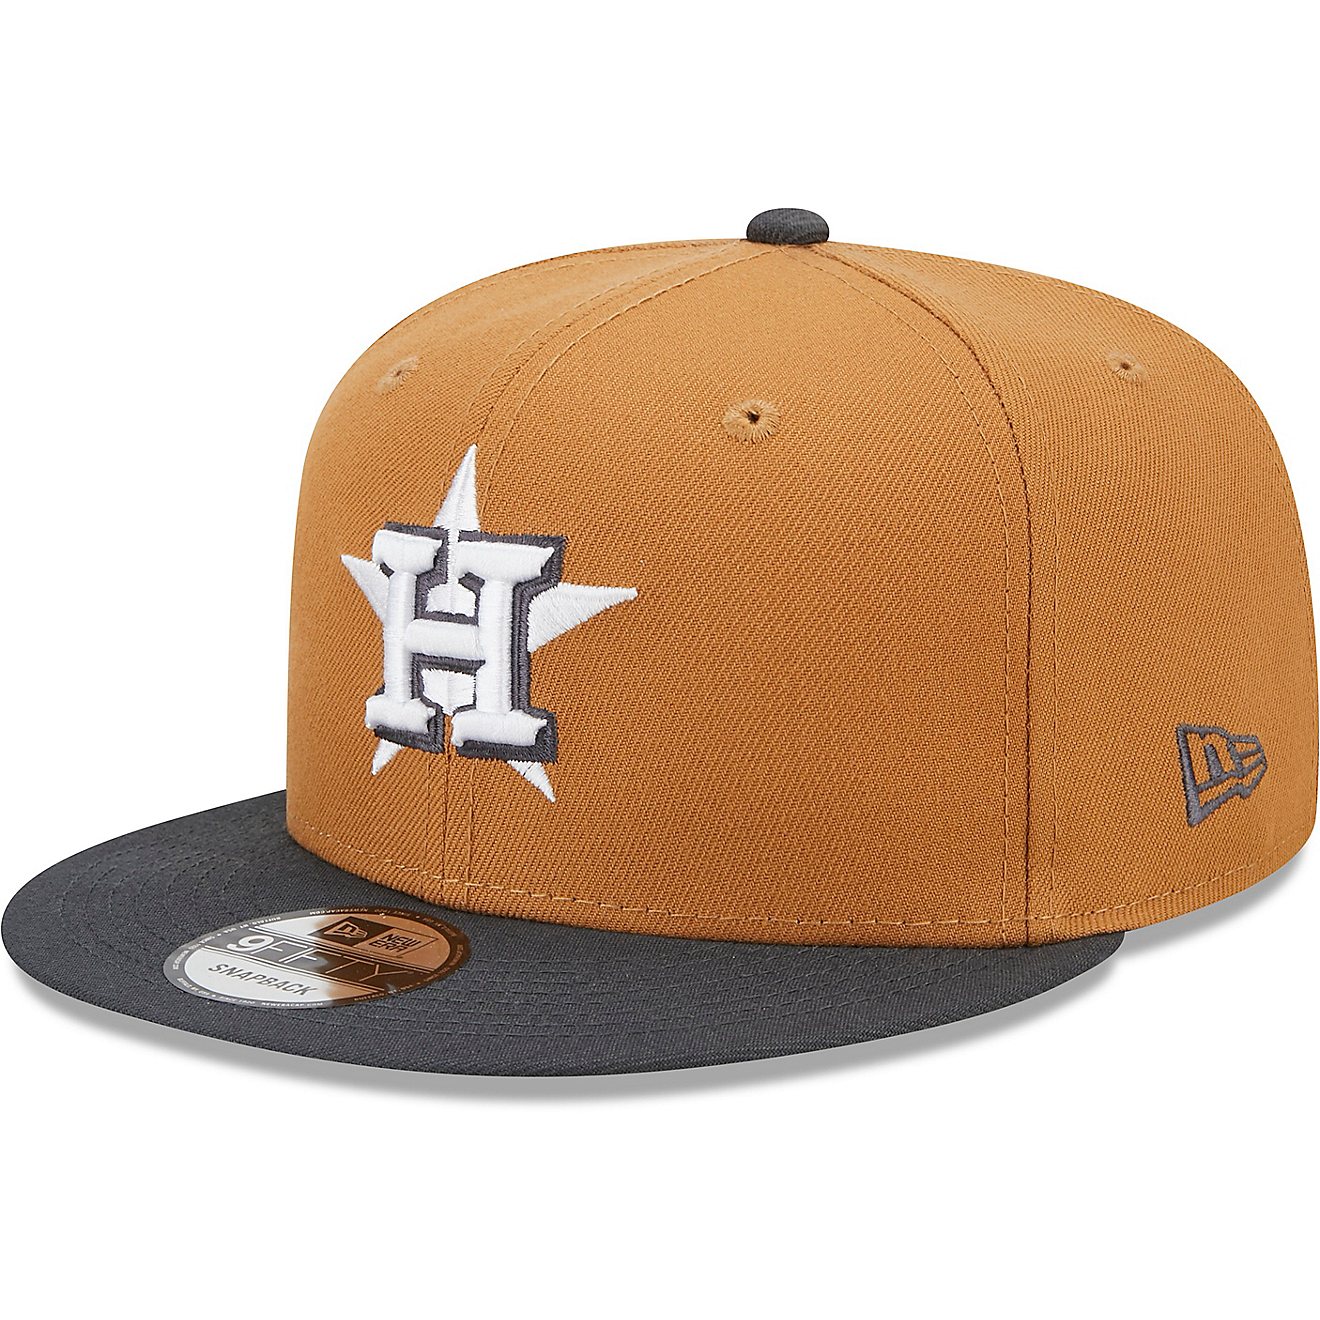 New Era Men's Houston Astros 2-Tone Pack 9FIFTY Cap                                                                              - view number 1